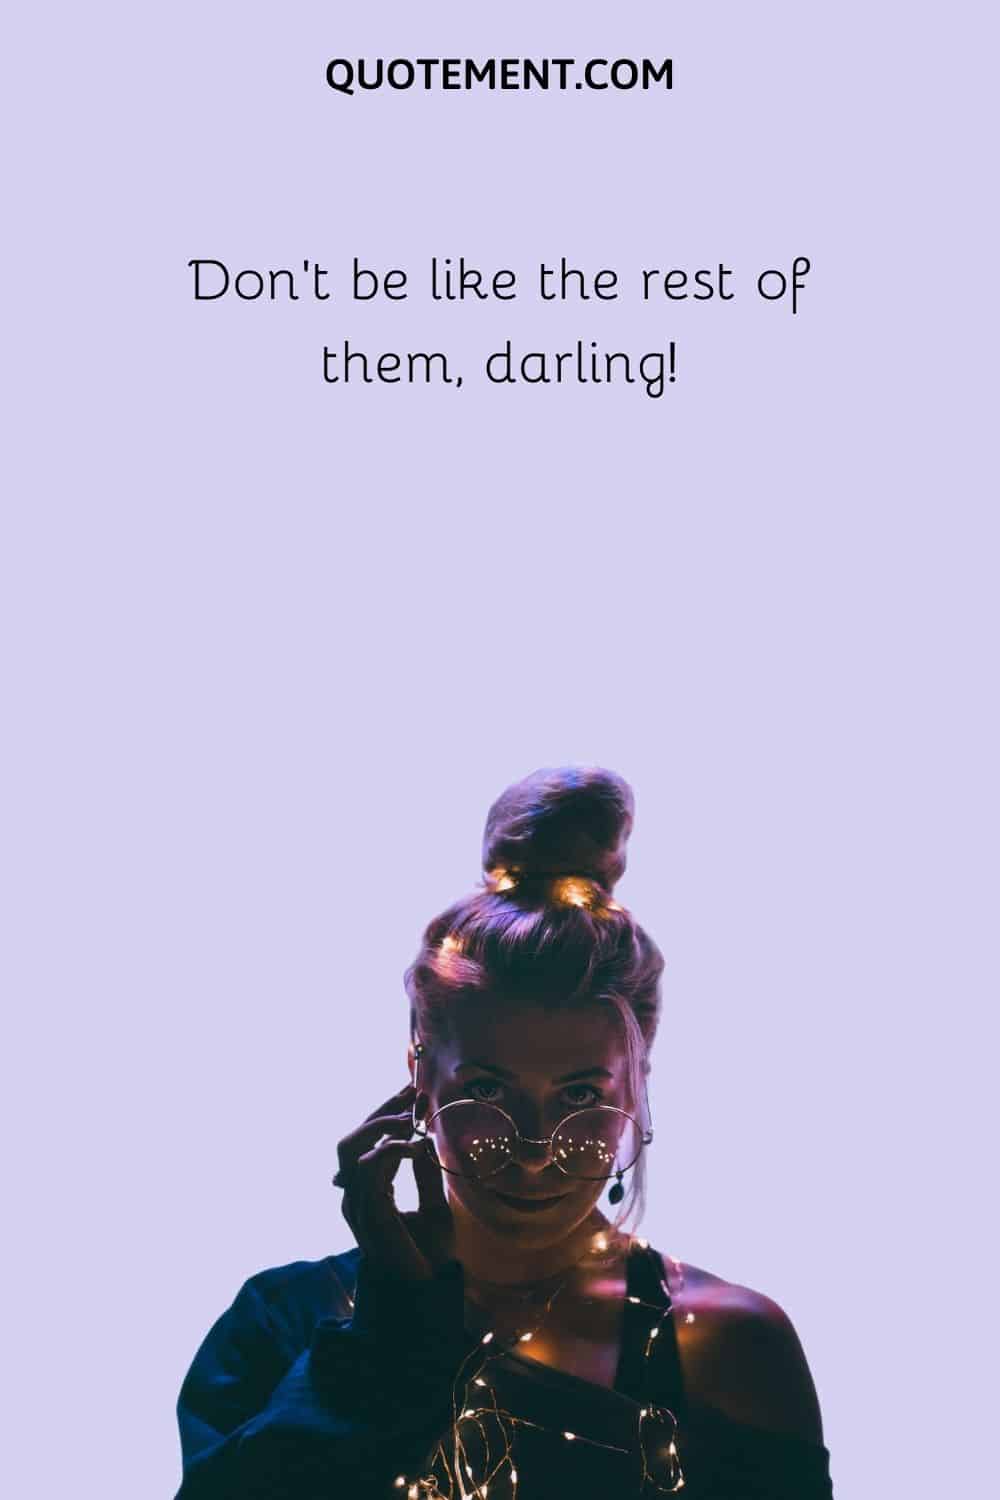 Don’t be like the rest of them, darling